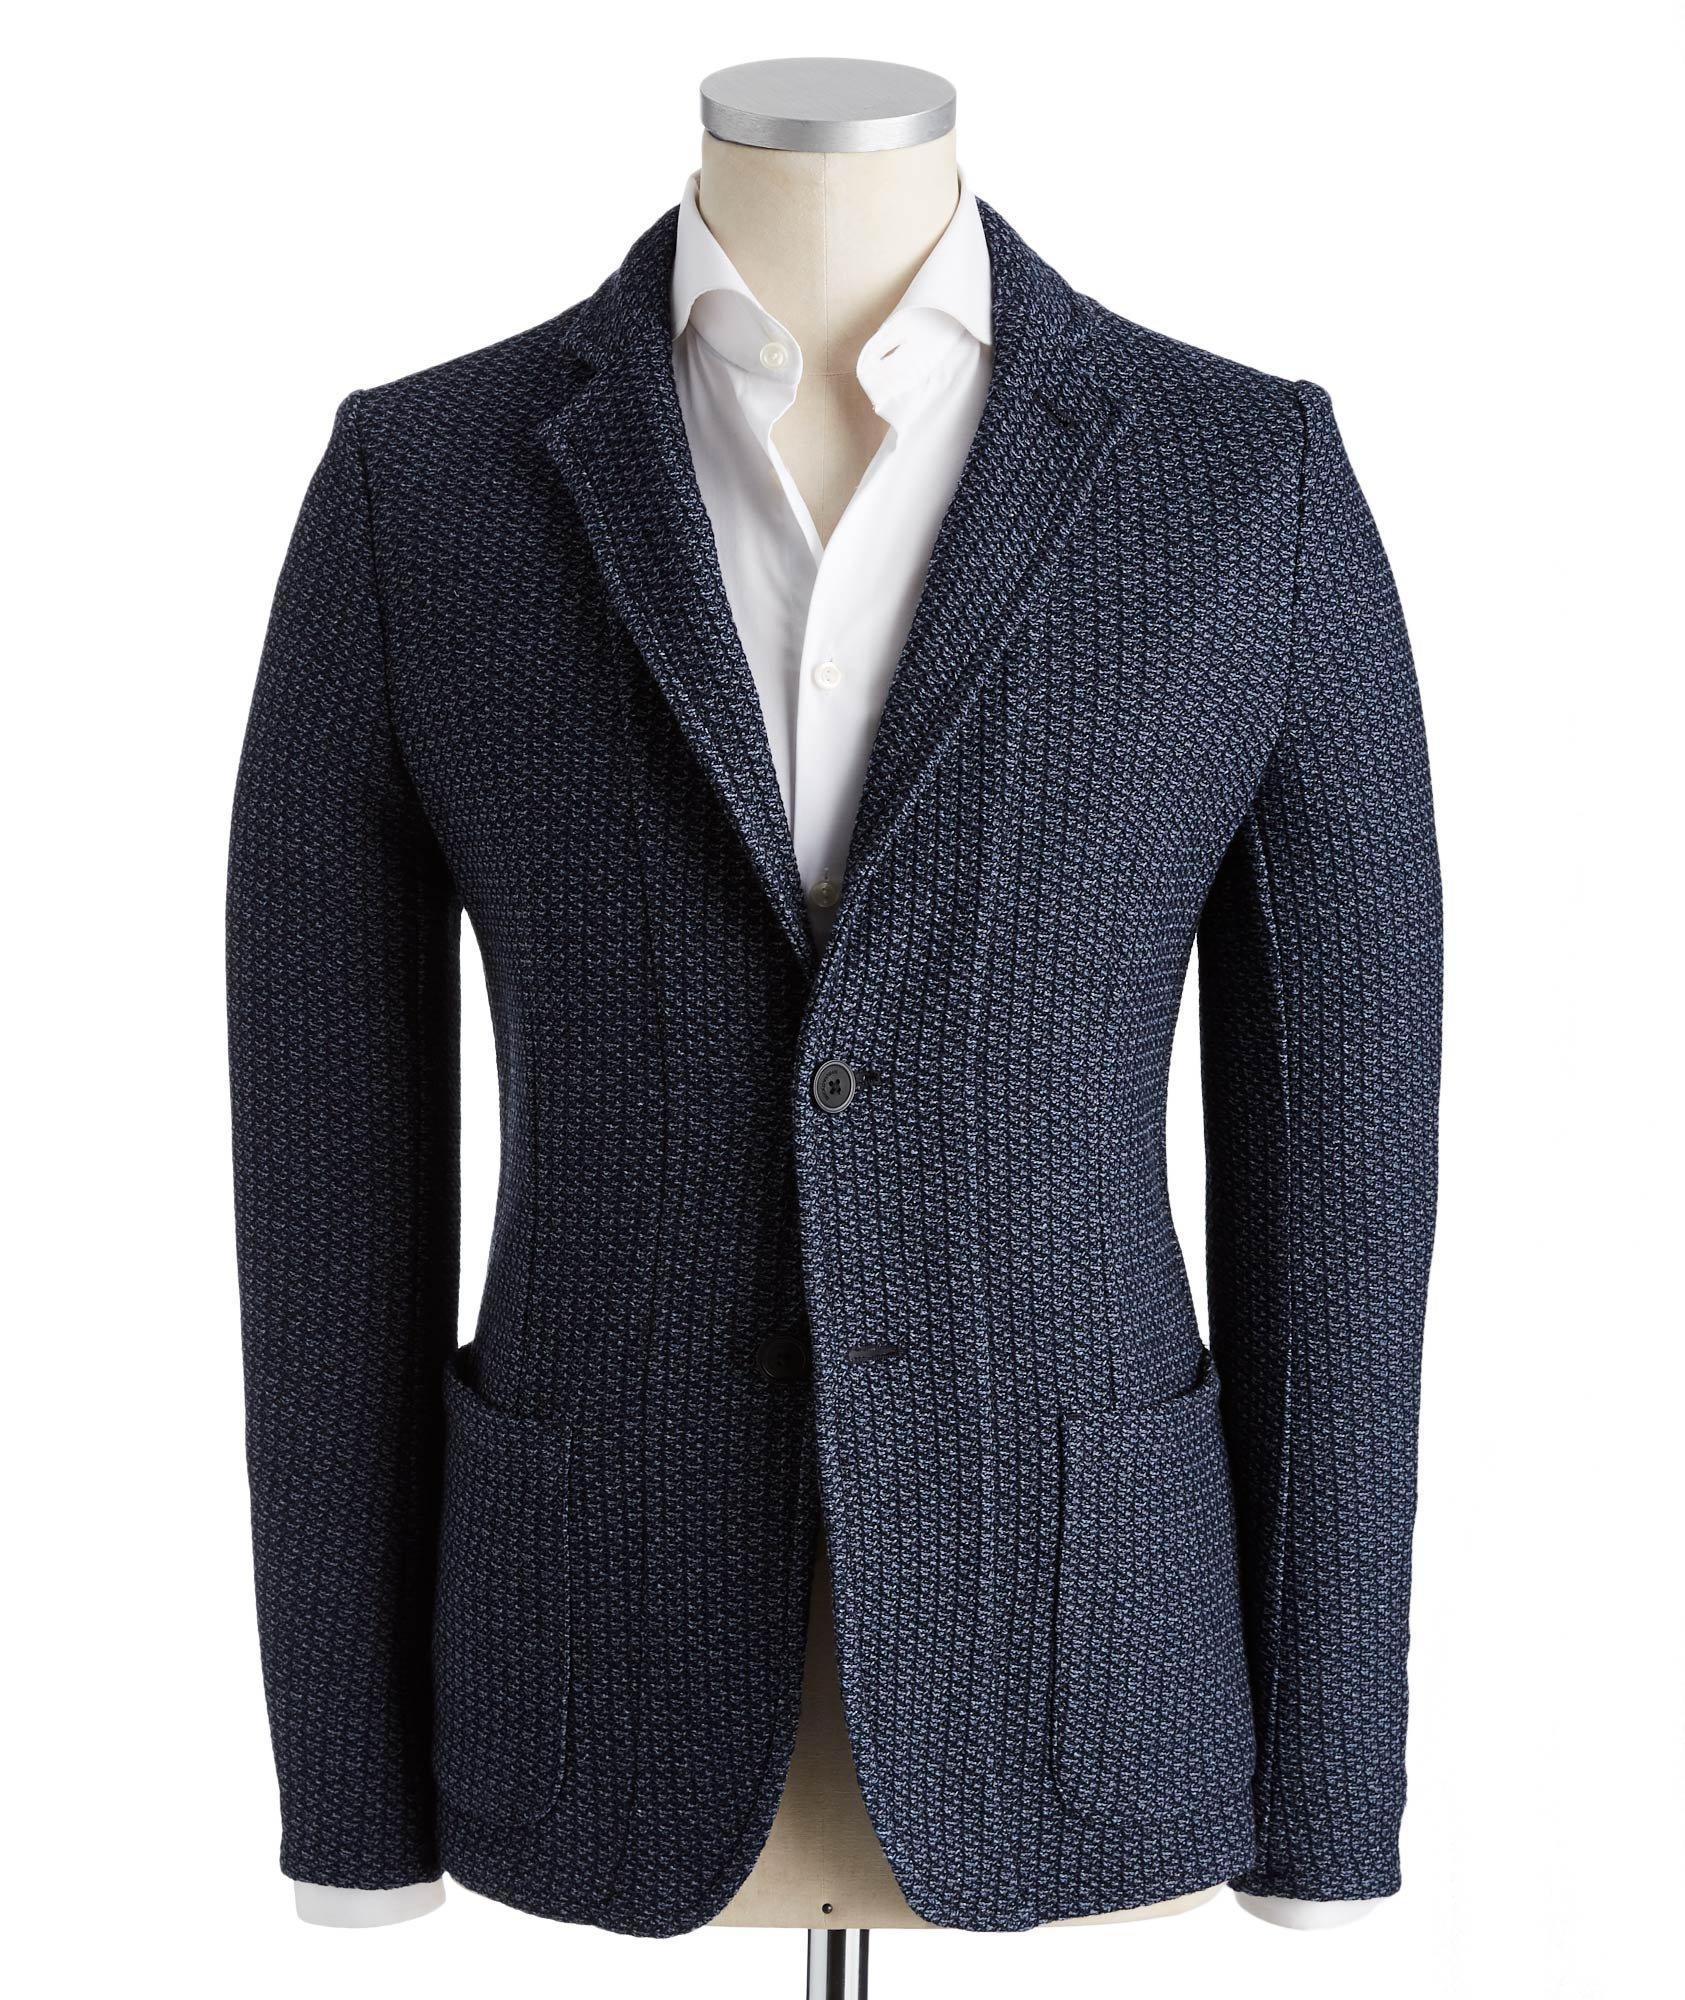 Unstructured Knit Cotton Sports Jacket image 0